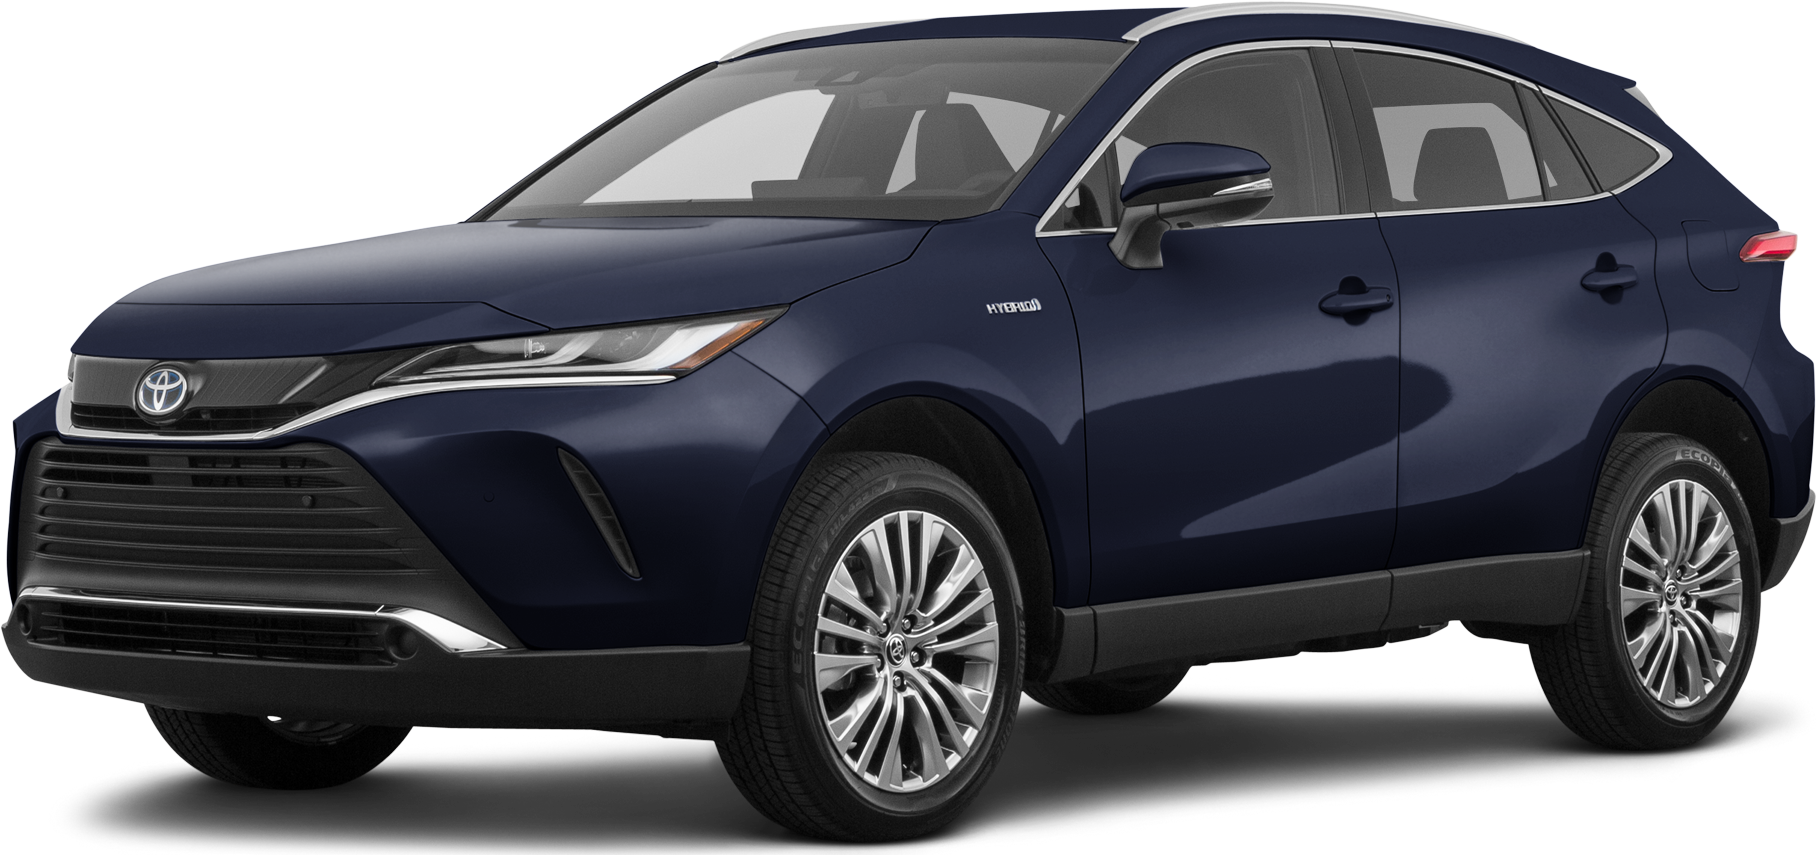 2021 Toyota Venza Reviews, Pricing & Specs | Kelley Blue Book